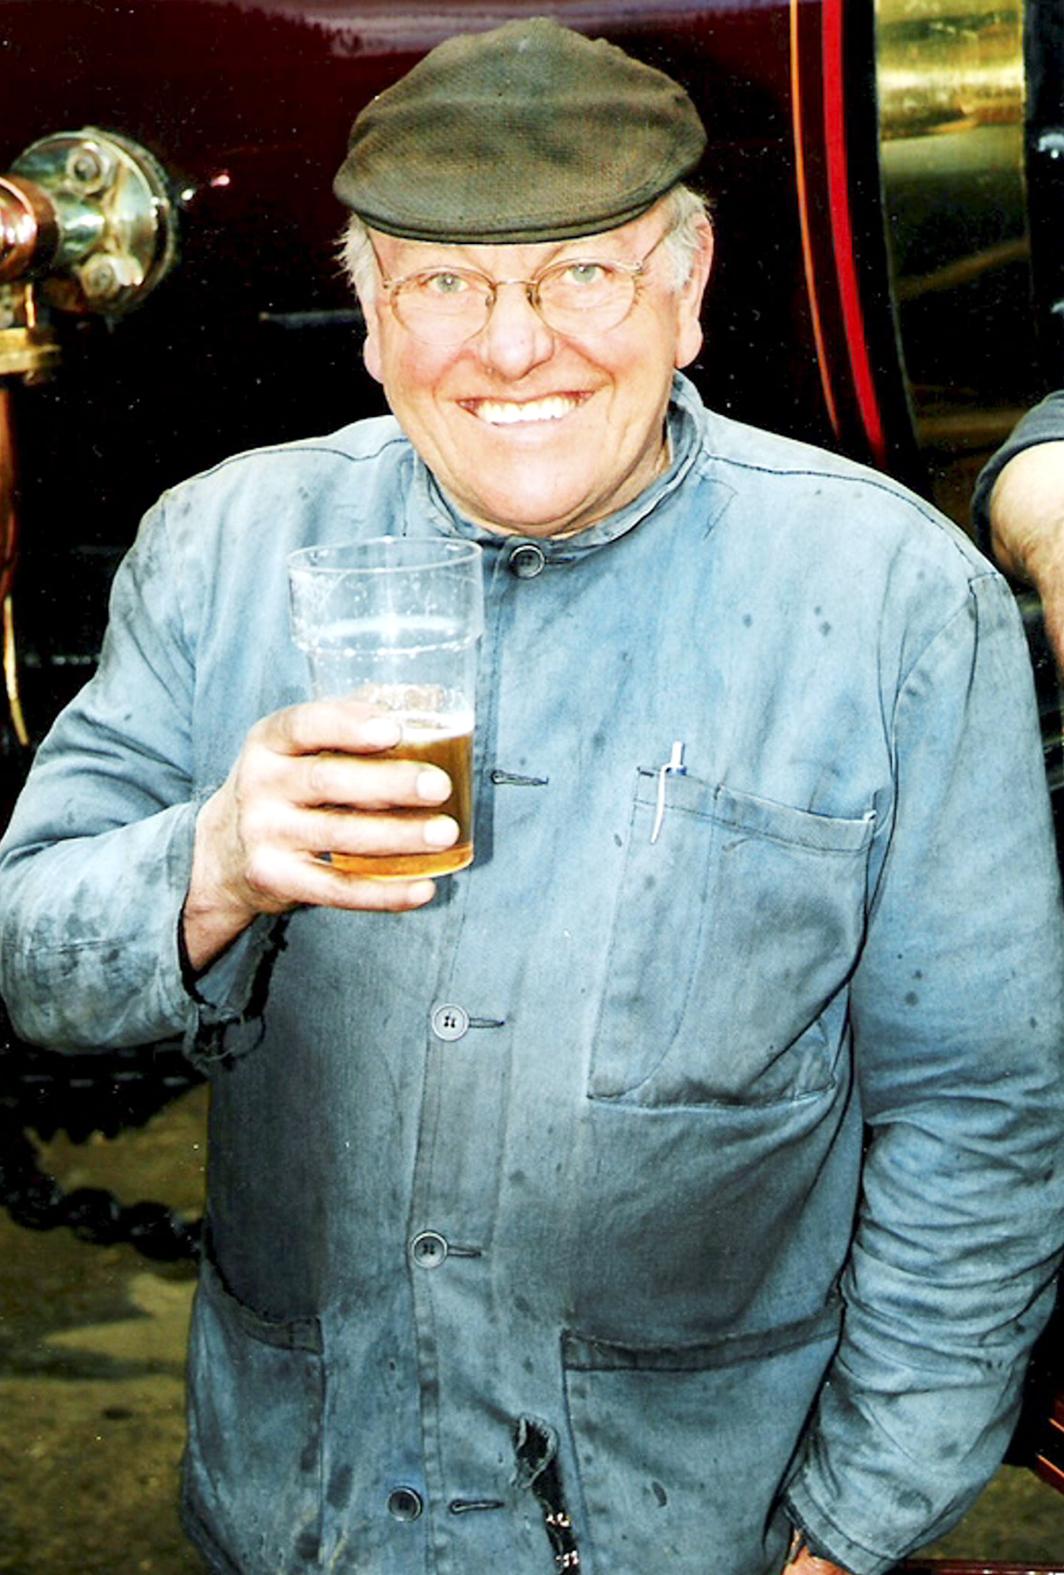 Down-to-earth steeplejack Fred Dibnah helped put Bolton on the map with his infectious television musings on all things industrial